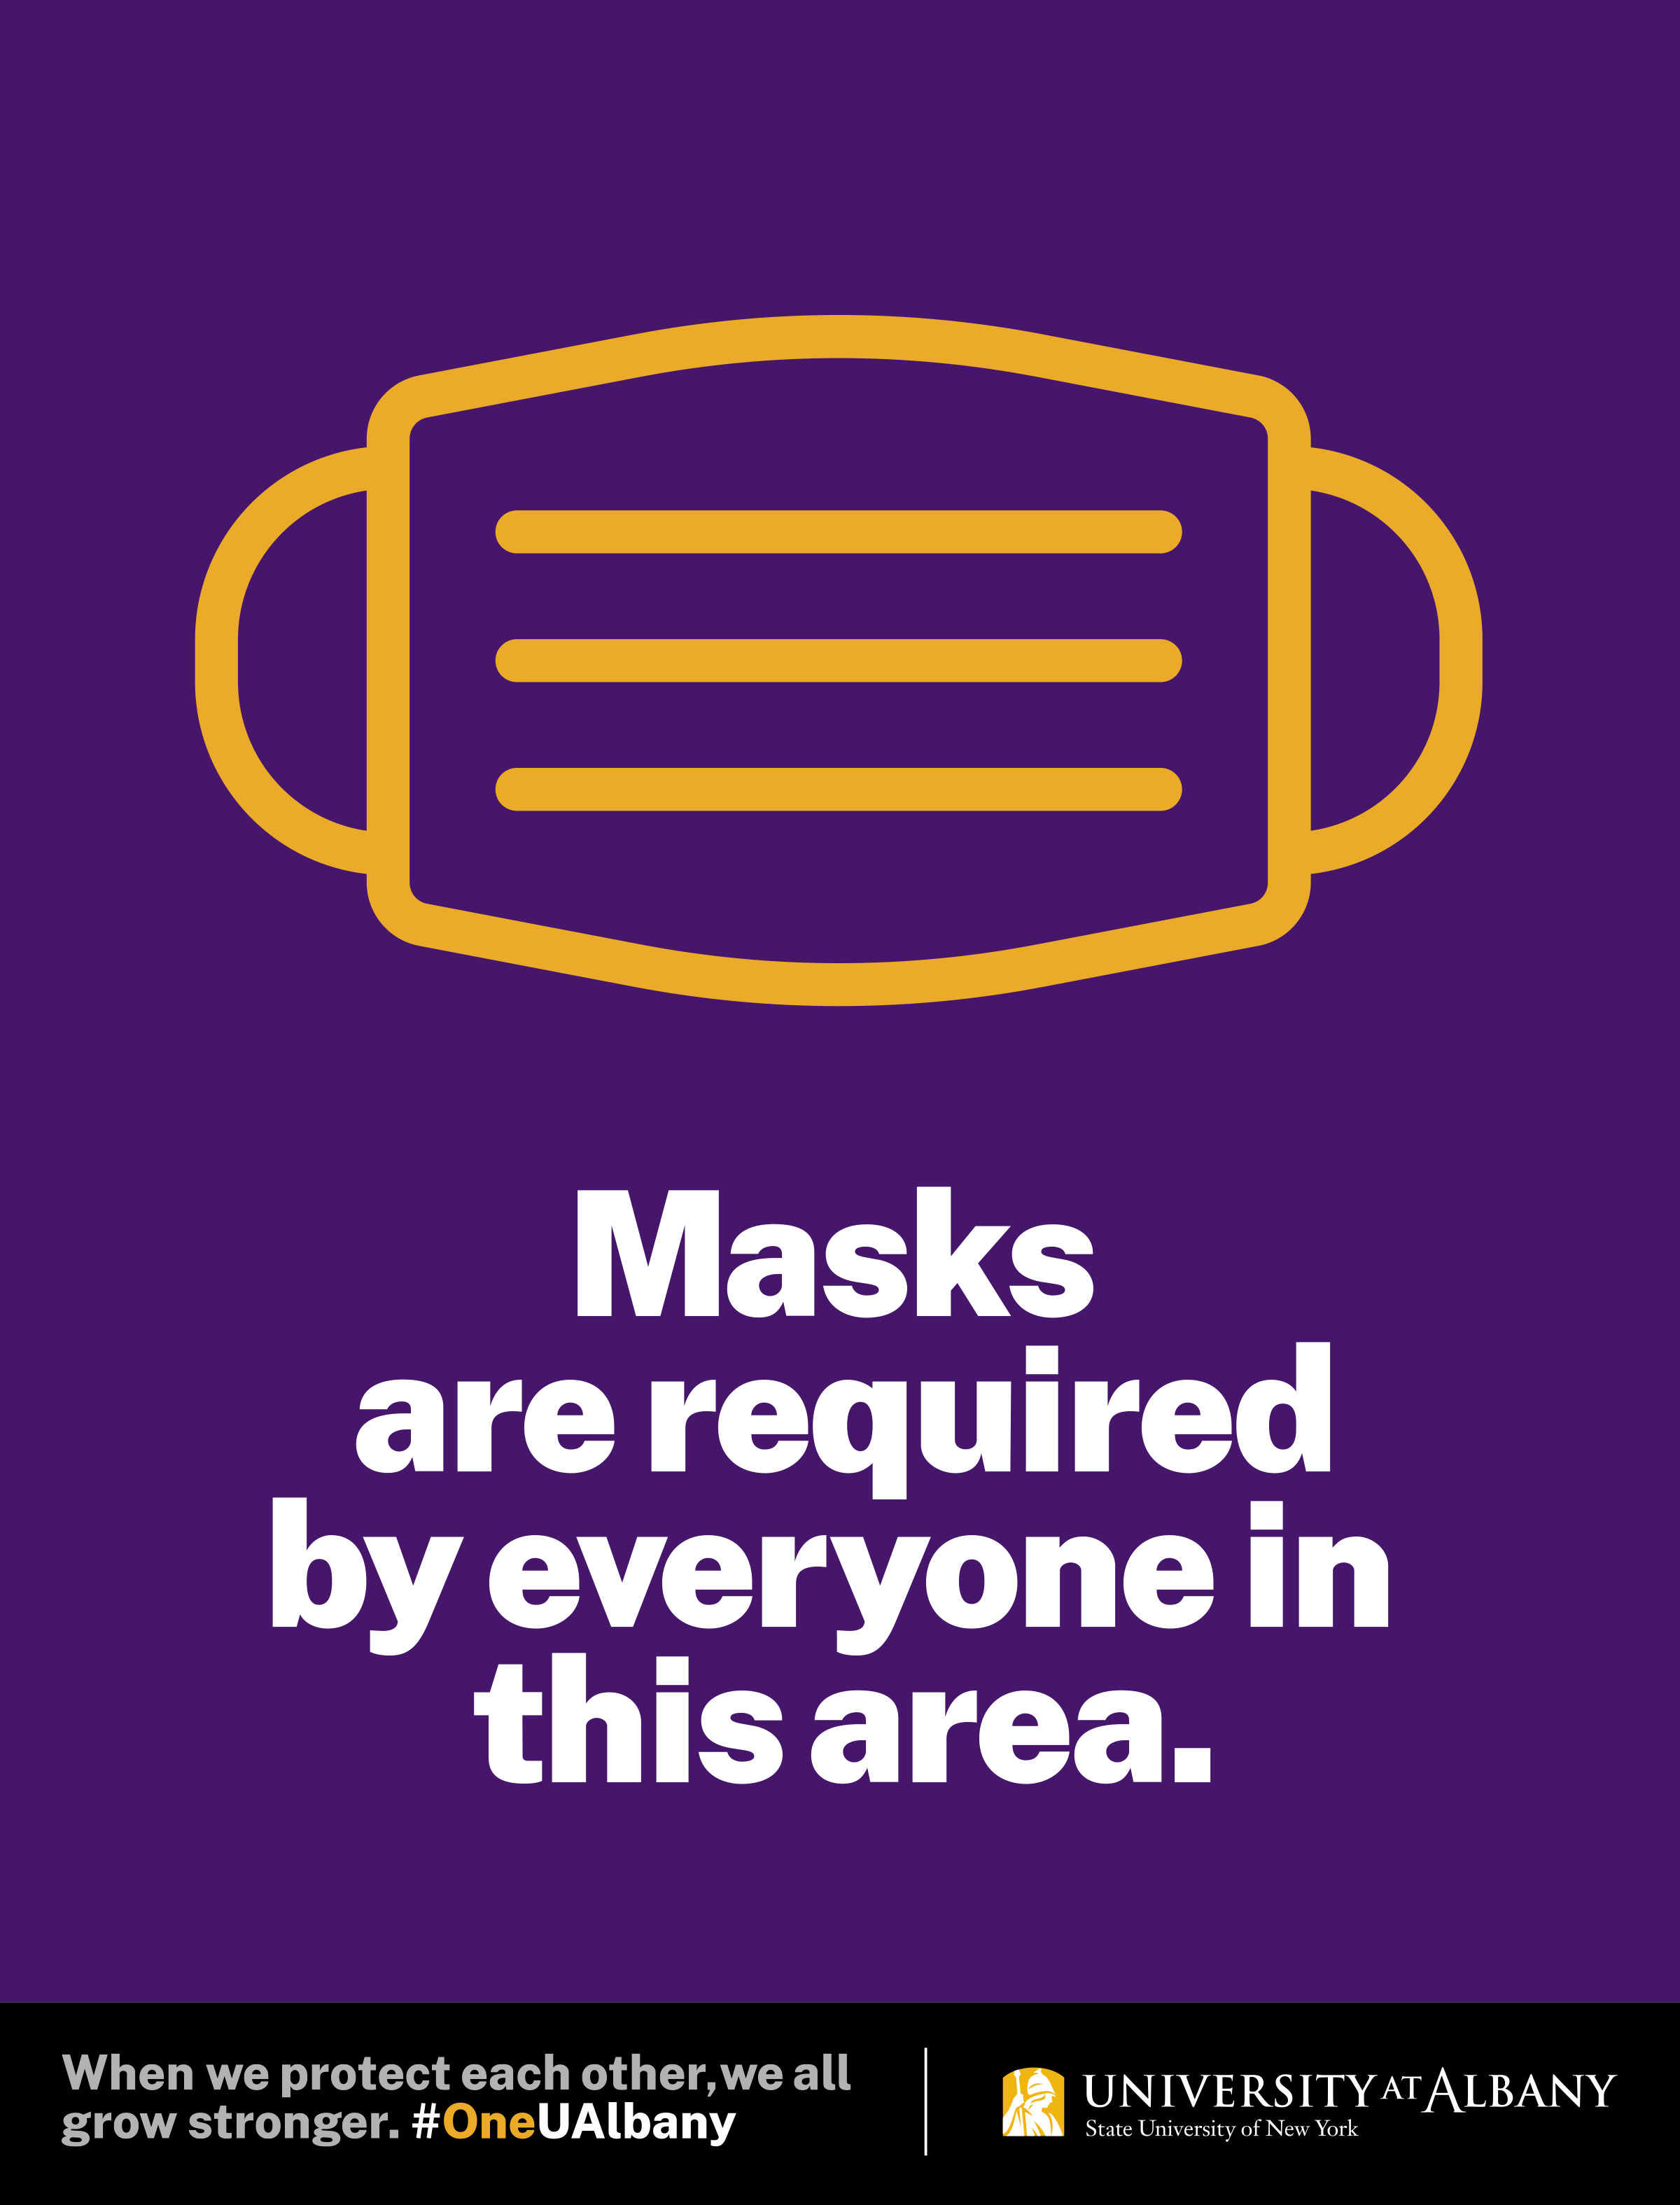 Masks are required by everyone i this area.